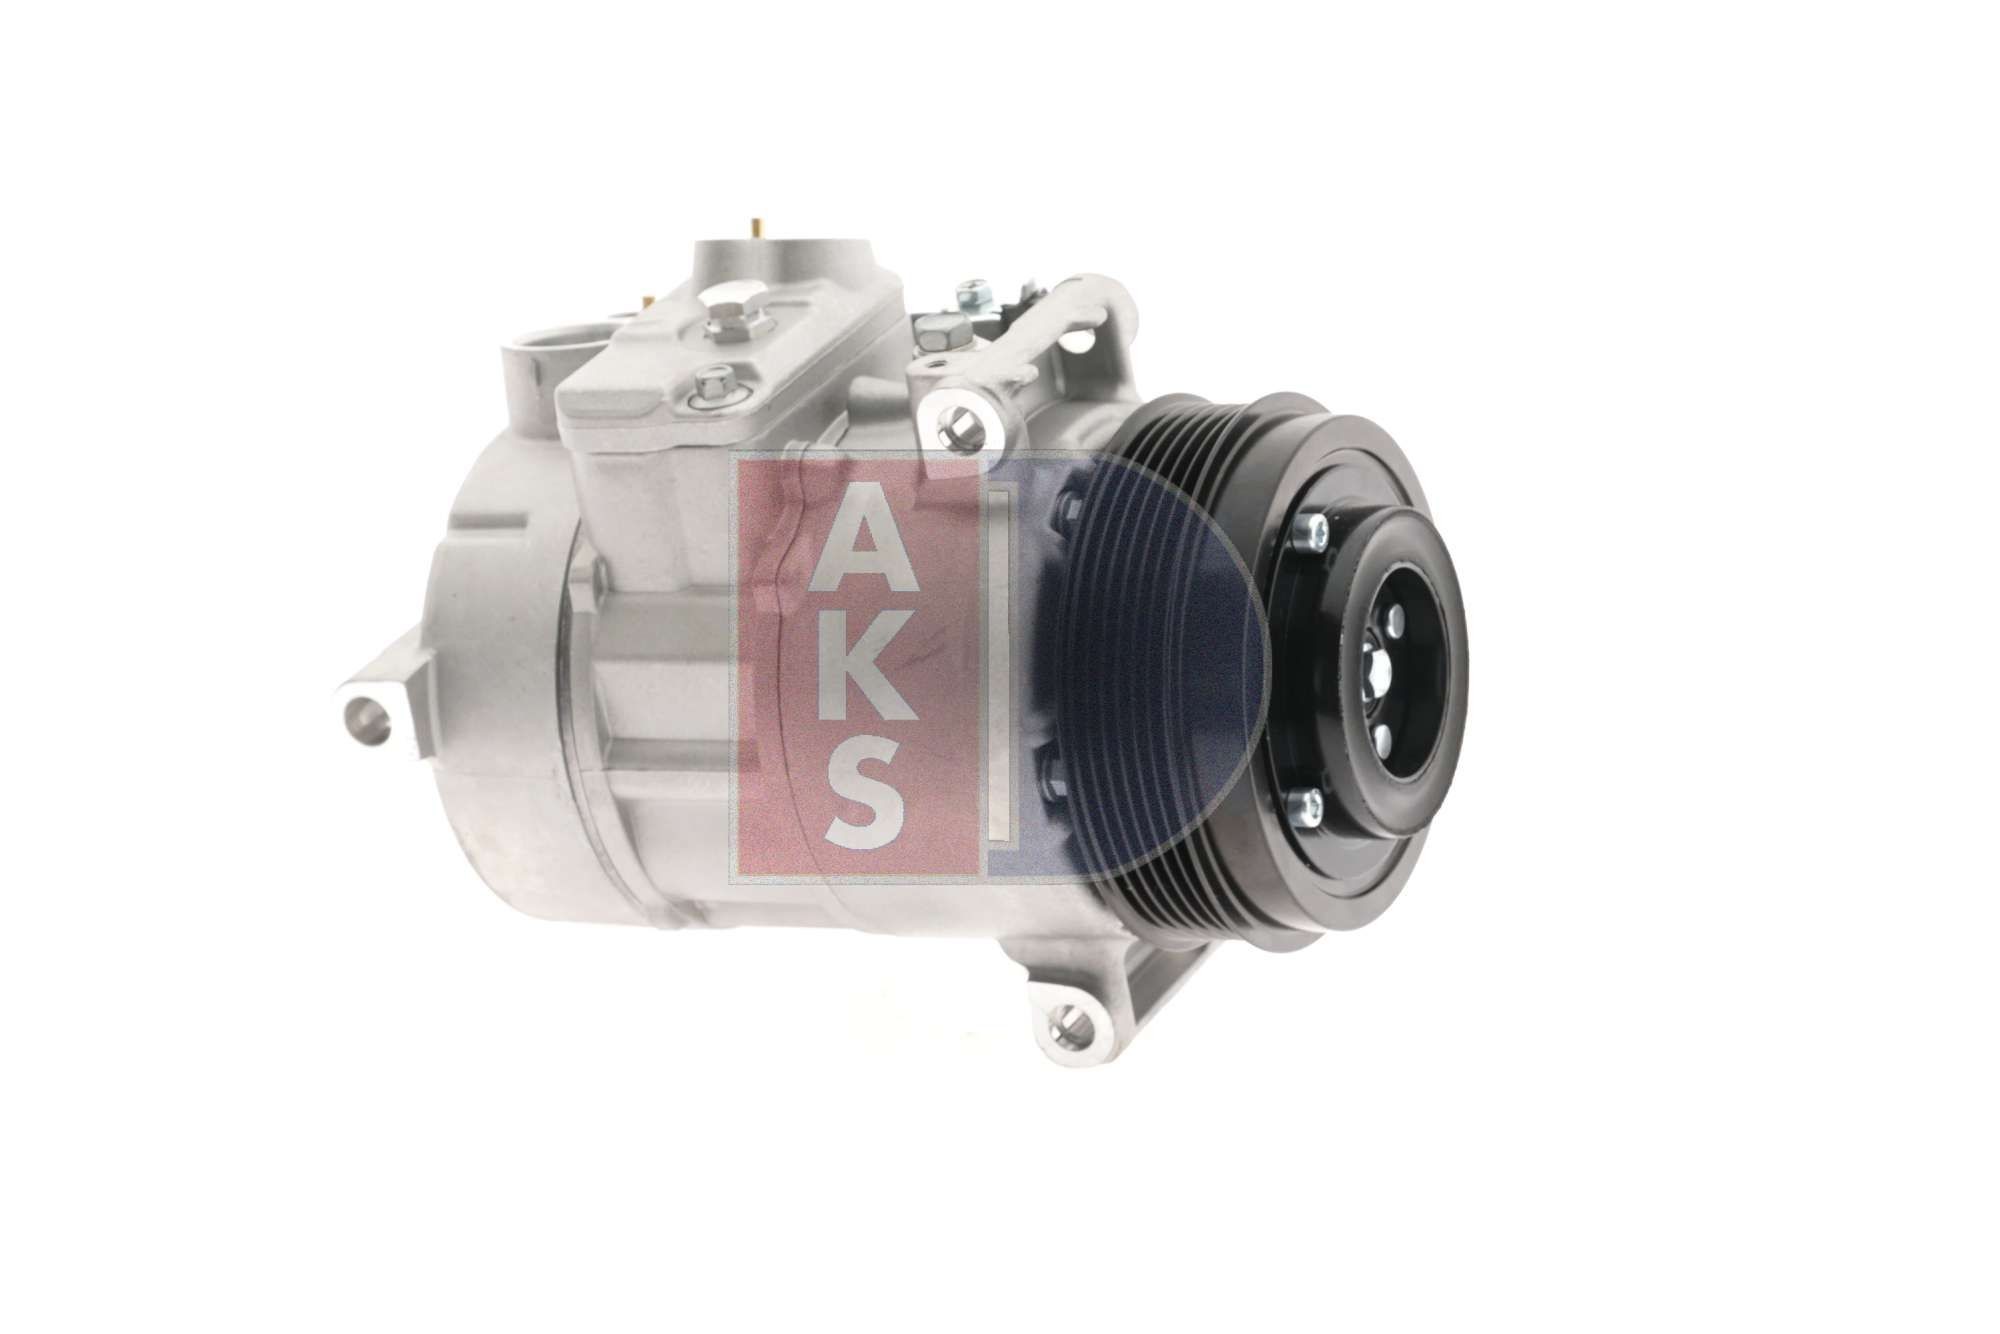 Air conditioning compressor 853048N from AKS DASIS